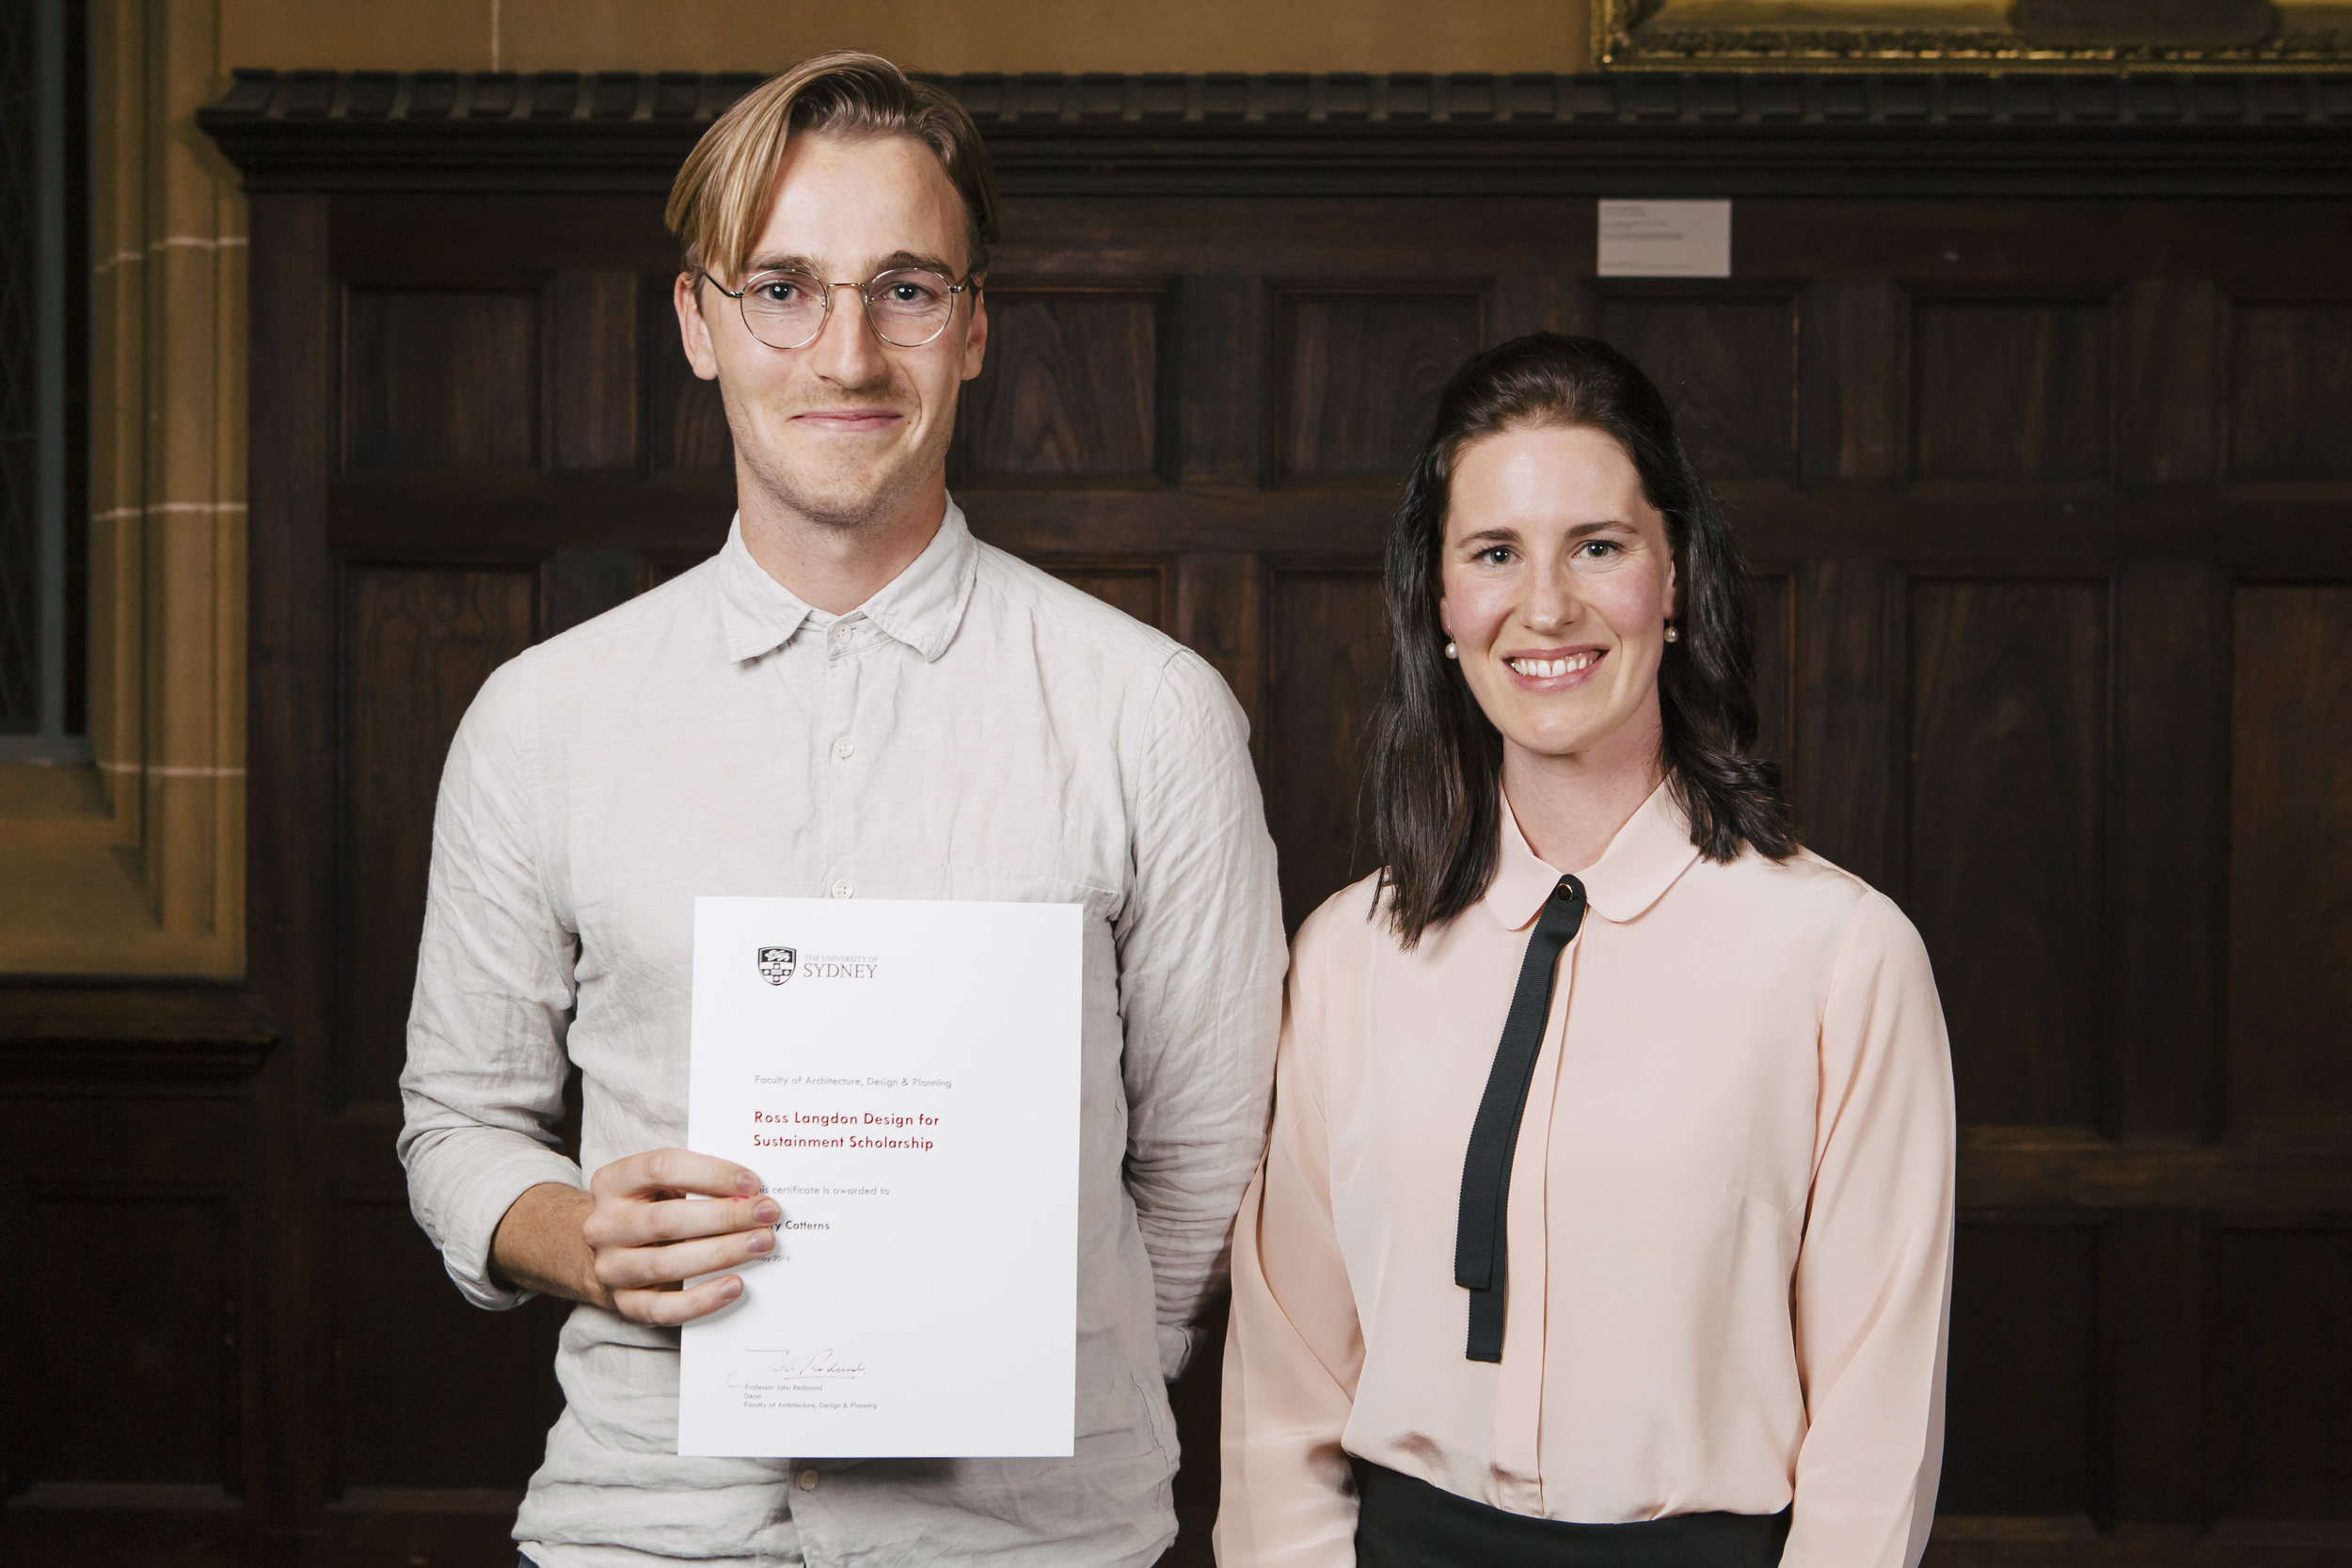 USYD_Scholarships&Prizes_03_05_16_credit_Jacquie_Manning_75.jpg